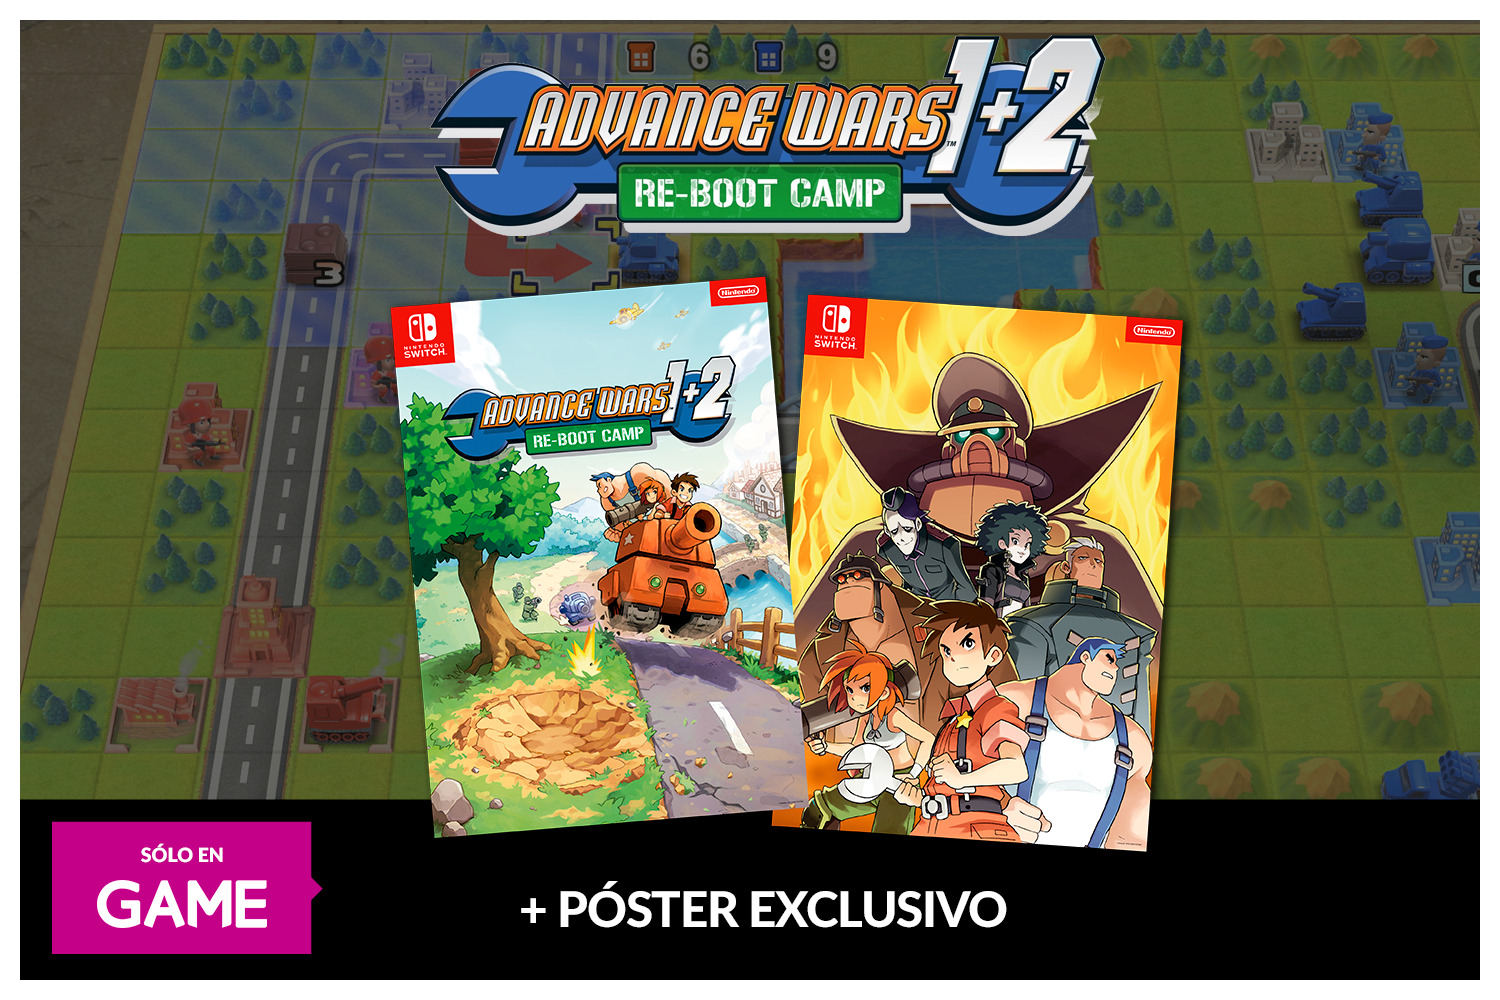 ADVANCE WARS 12 RE BOOT CAMP con POSTER A DOBLE CARA exclusivo GAME Imagen 2